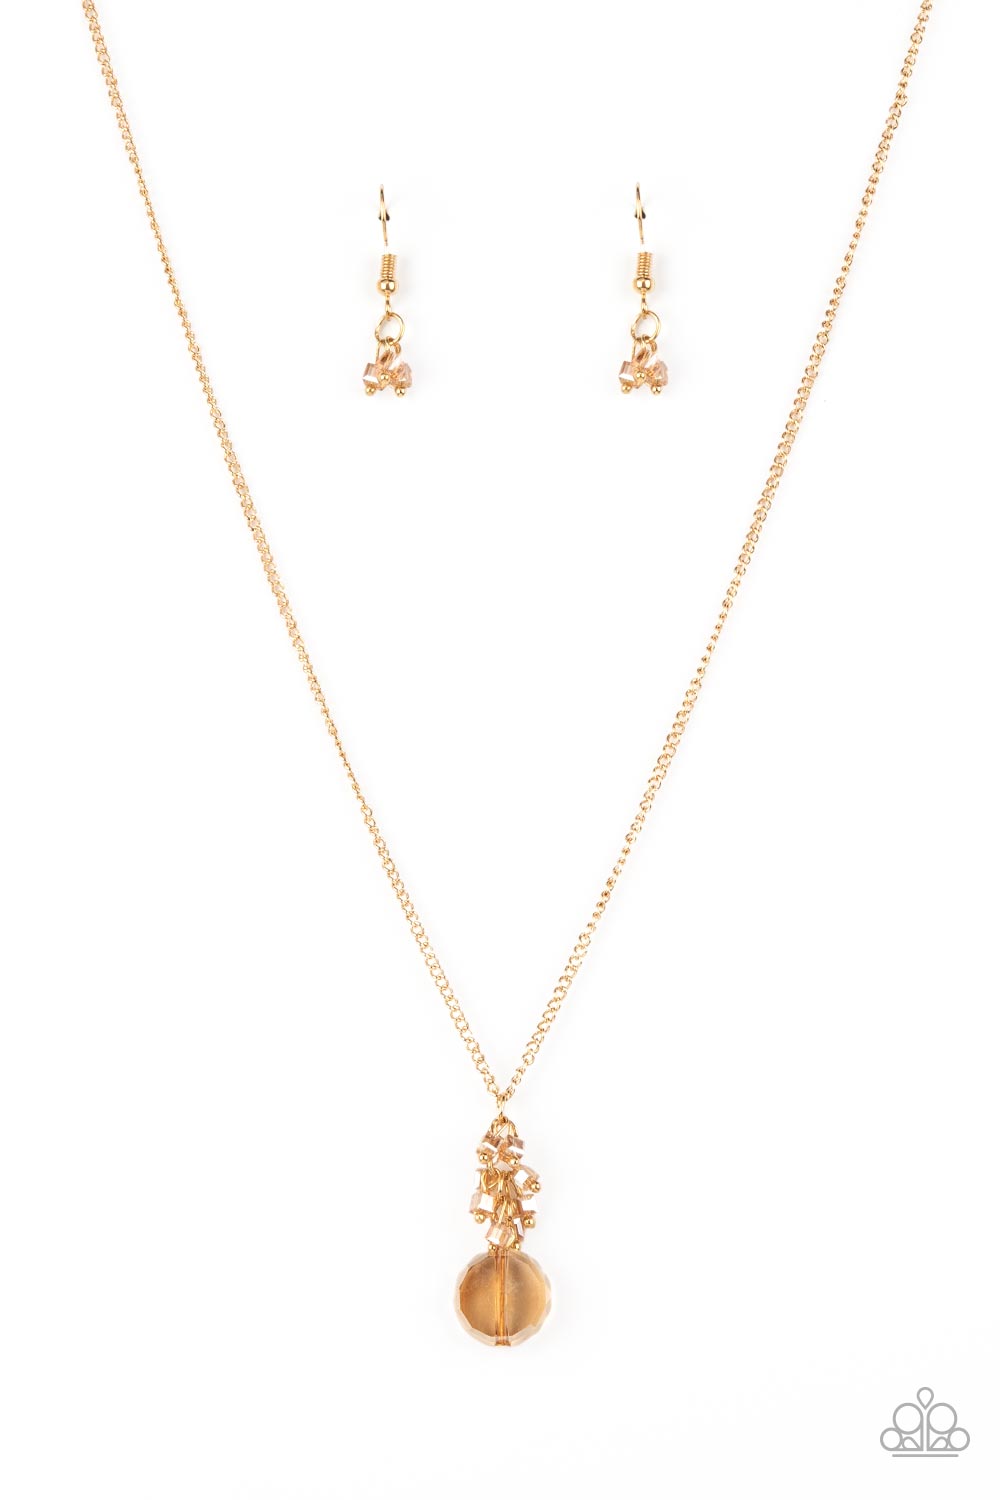 Clustered Candescence - Gold Gem Like Bead Necklace - Paparazzi Accessories